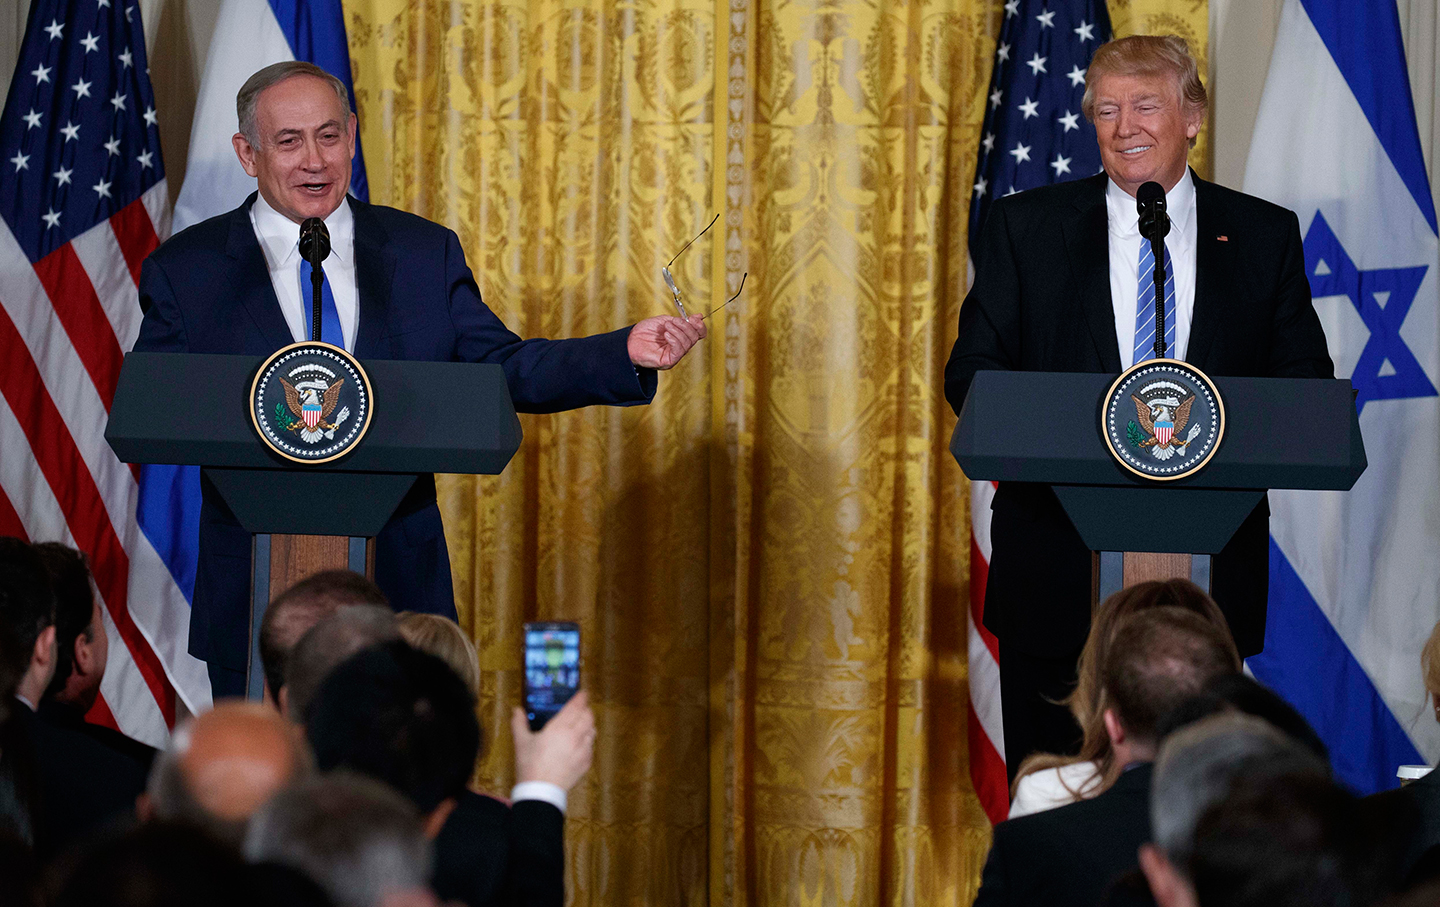 Trump and Netanyahu Joint Press Conference